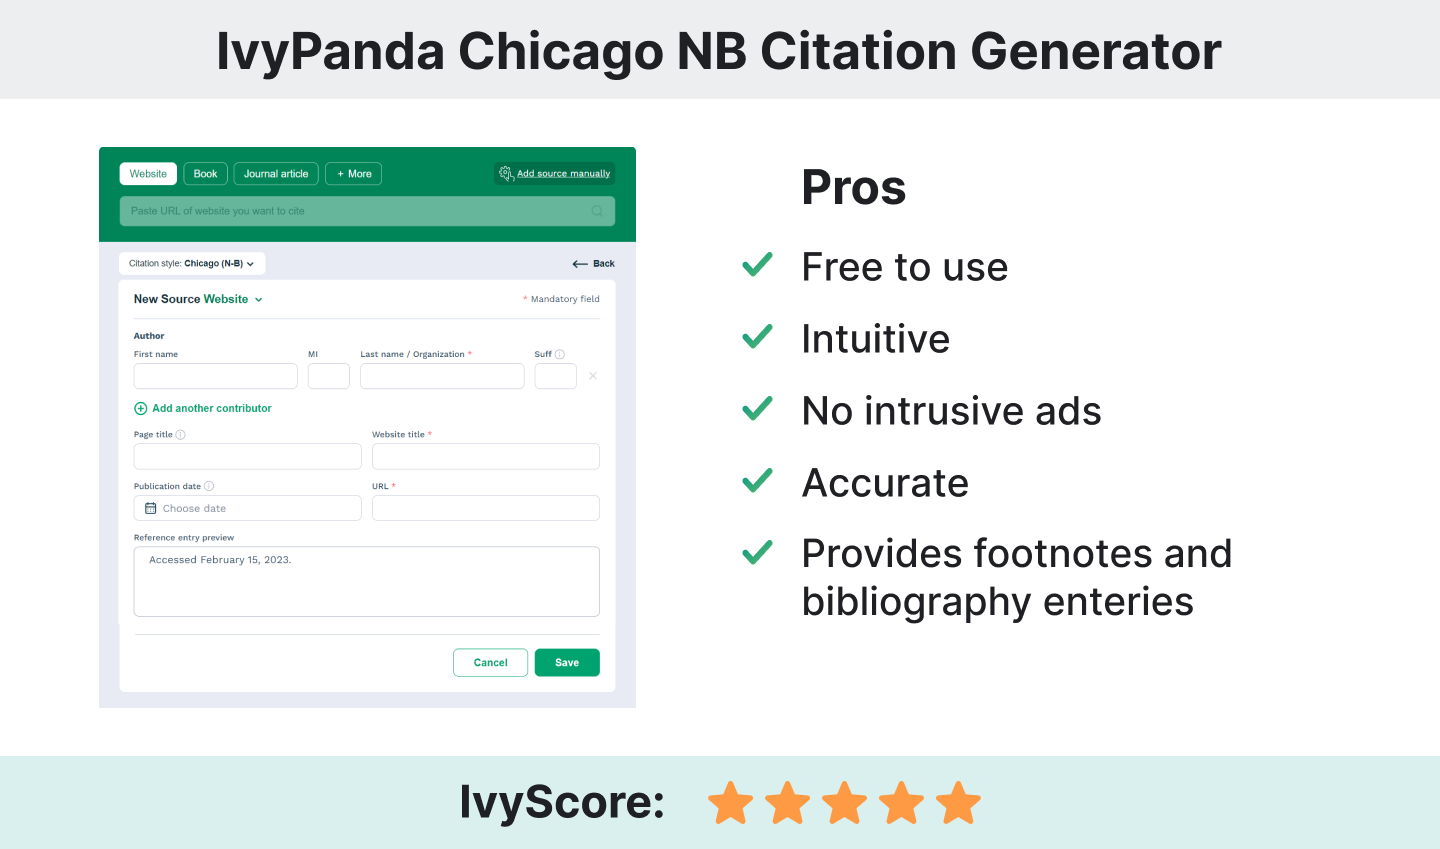 The picture illustrates the key features of the Chicago-style citation generator by IvyPanda.